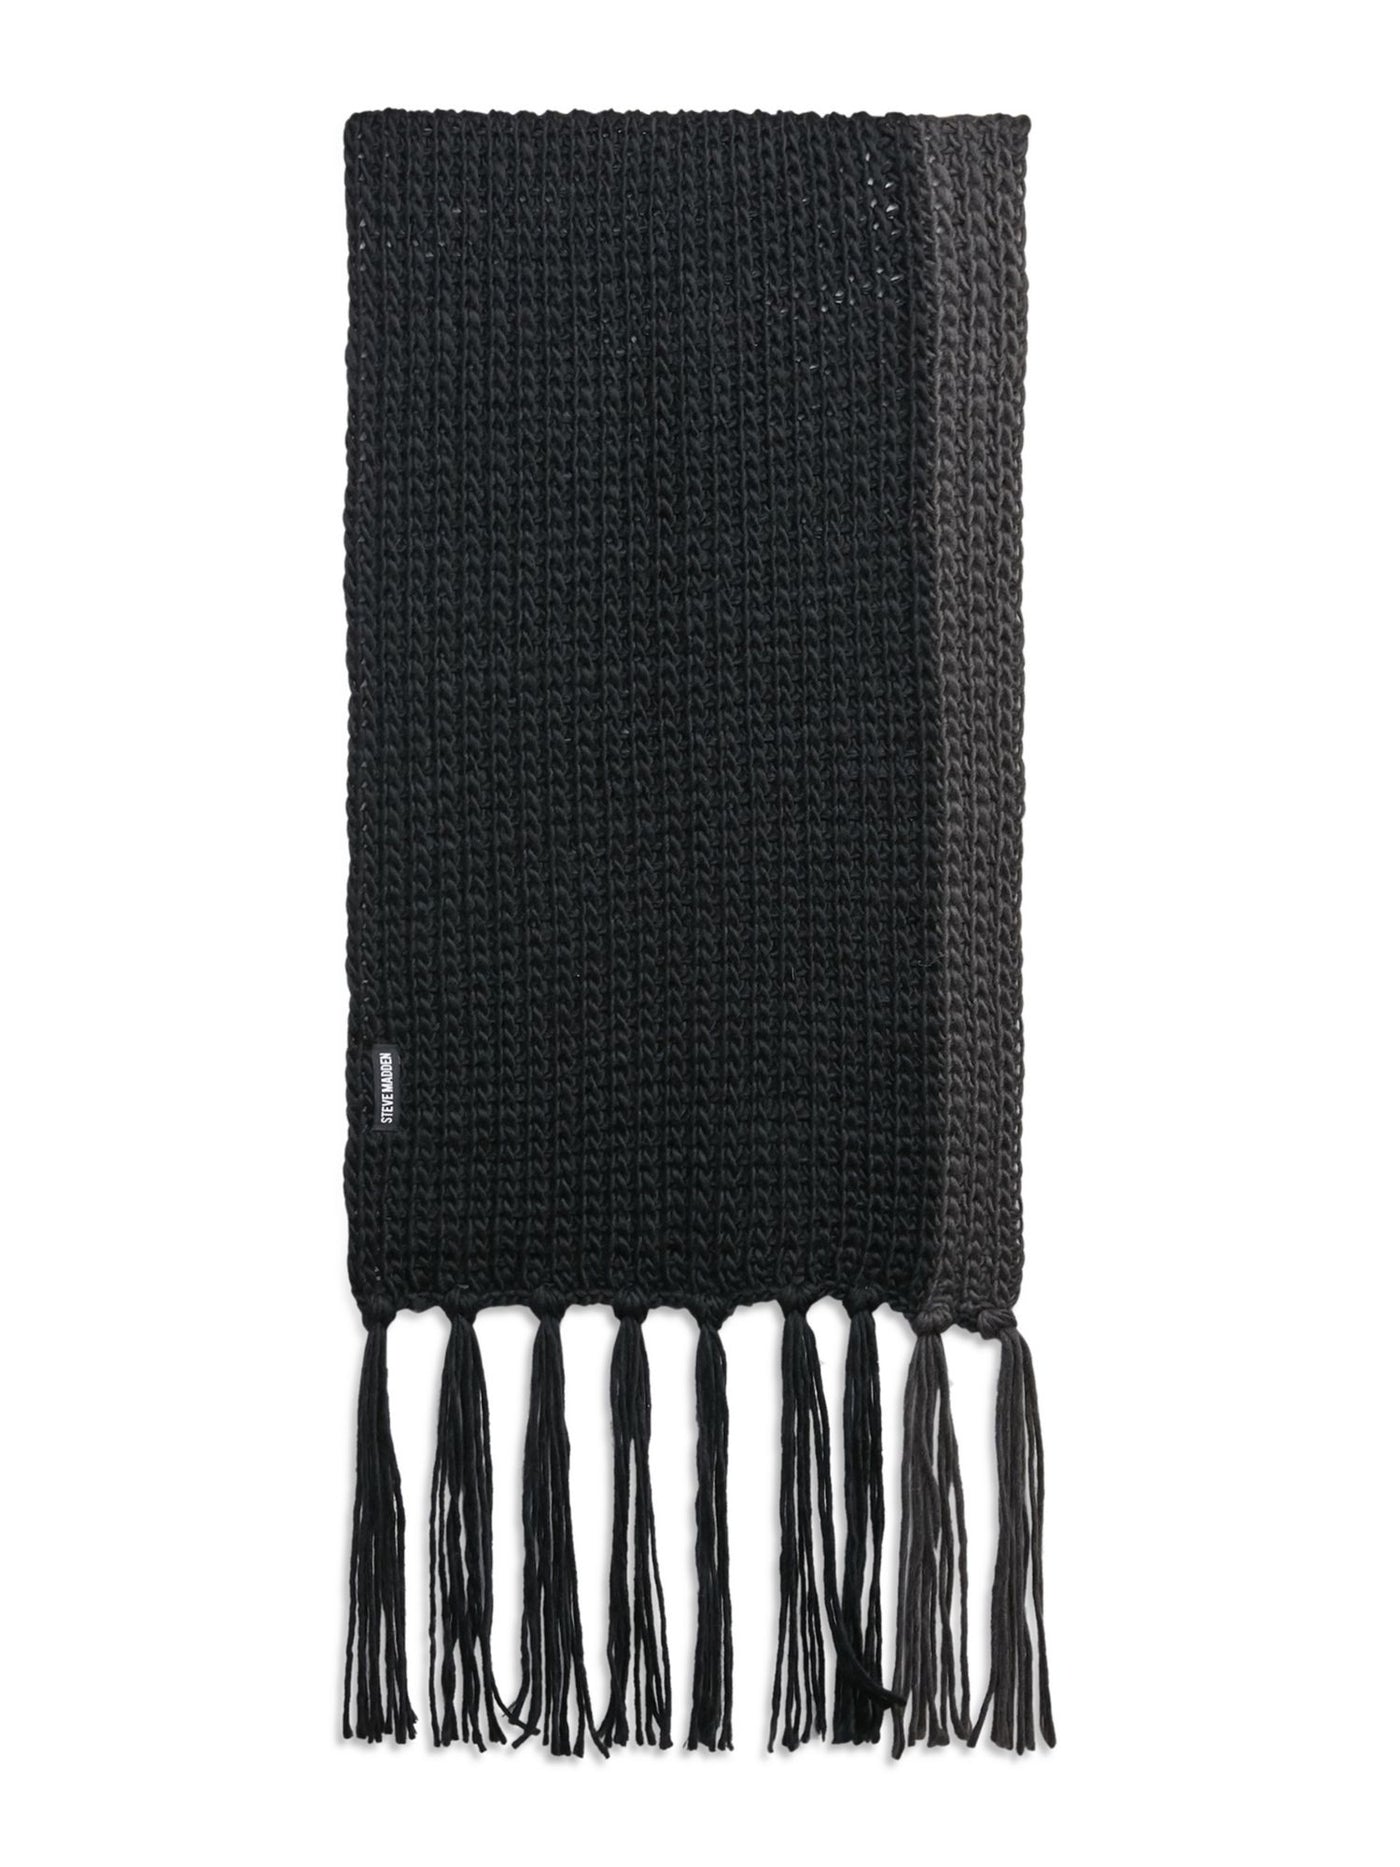 STEVE MADDEN Mens Black Acrylic Color Blocked Knitted Winter Scarf